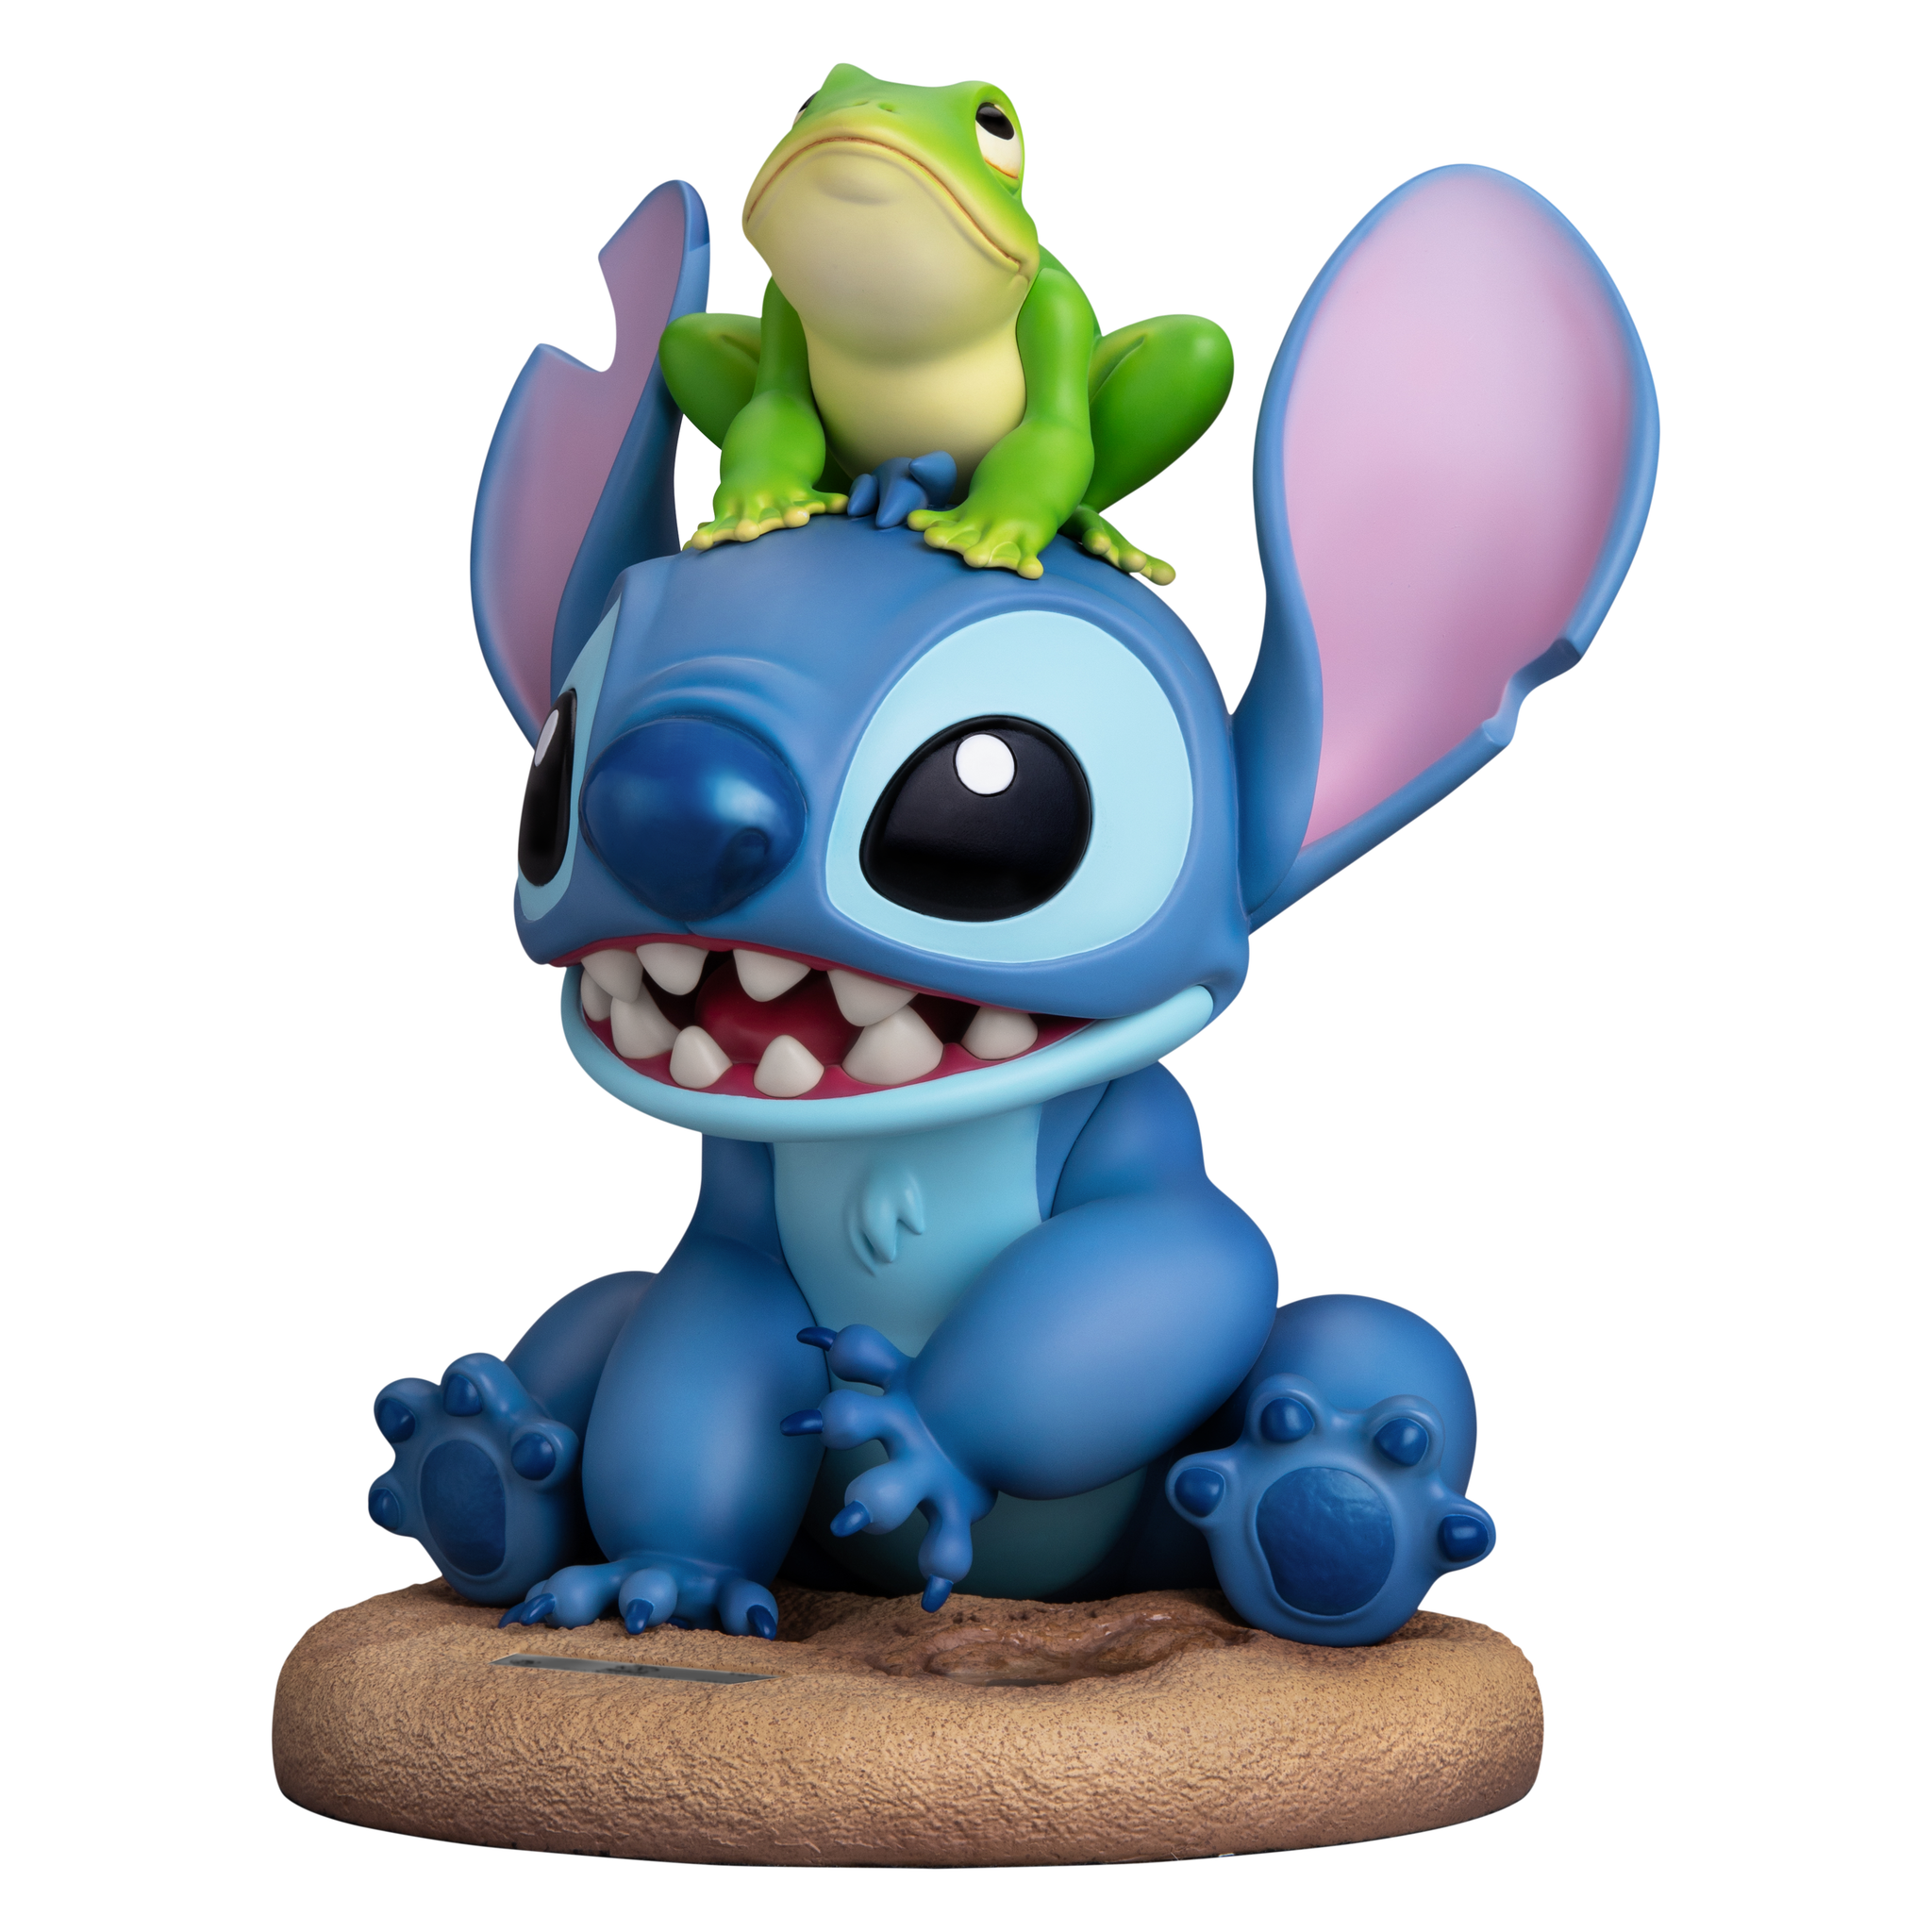 Disney Trading Pin 25886: Stitch with Frog